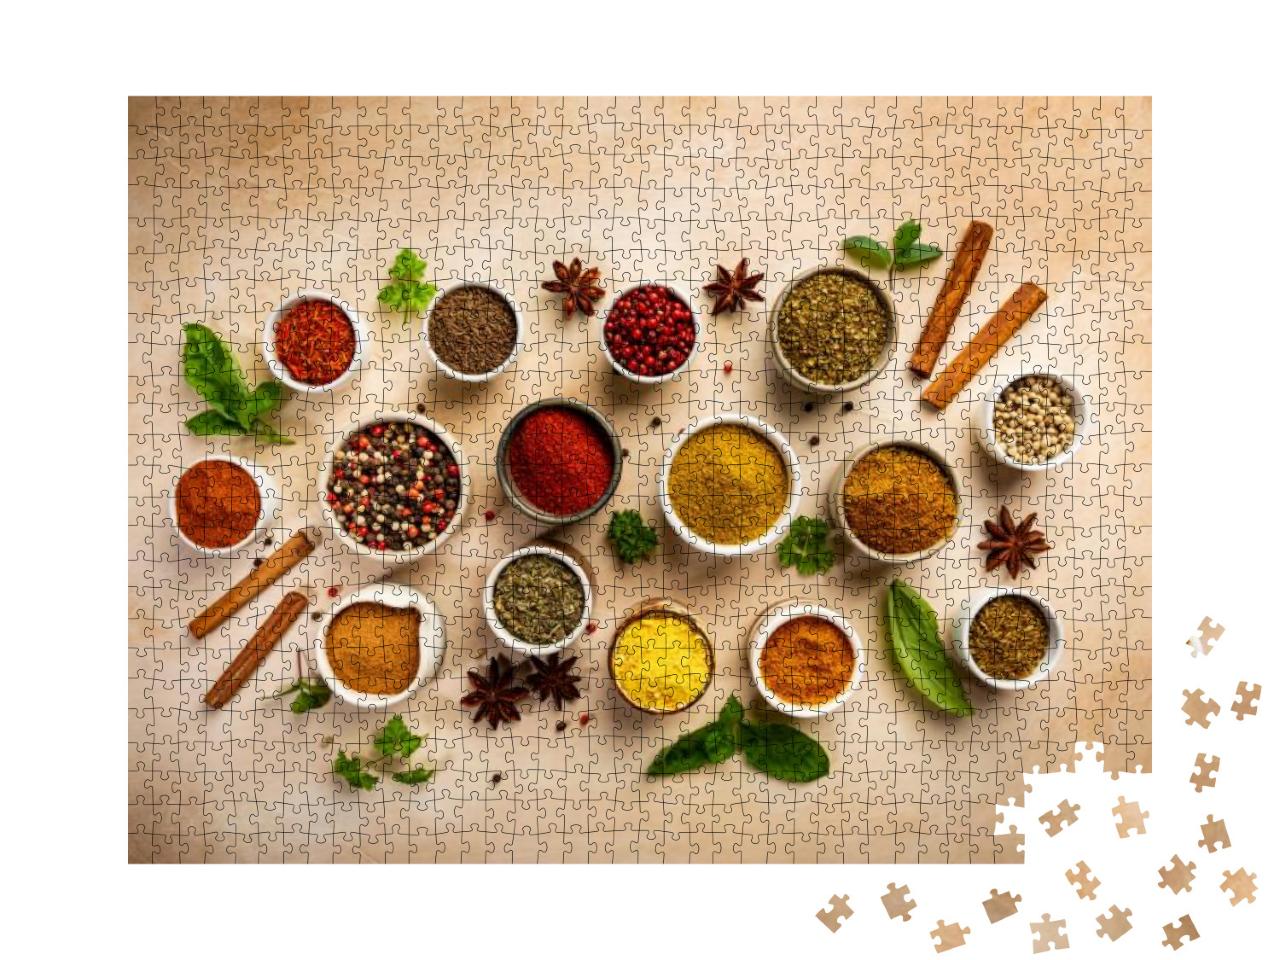 Herbs & Spices in Bowels Over Light Background. Top View... Jigsaw Puzzle with 1000 pieces